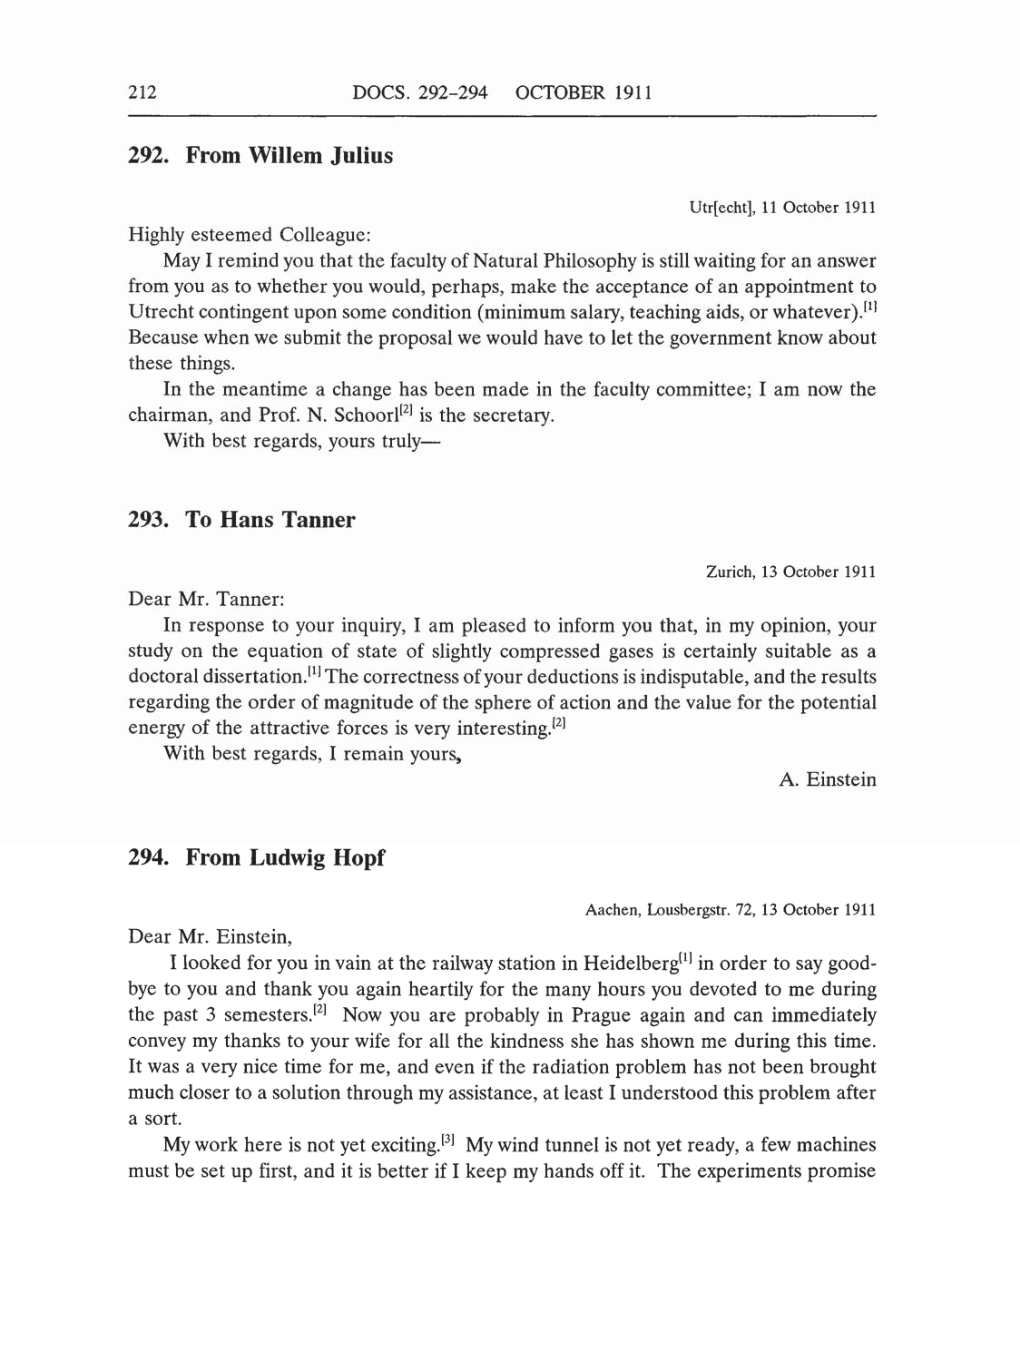 Volume 5: The Swiss Years: Correspondence, 1902-1914 (English translation supplement) page 212